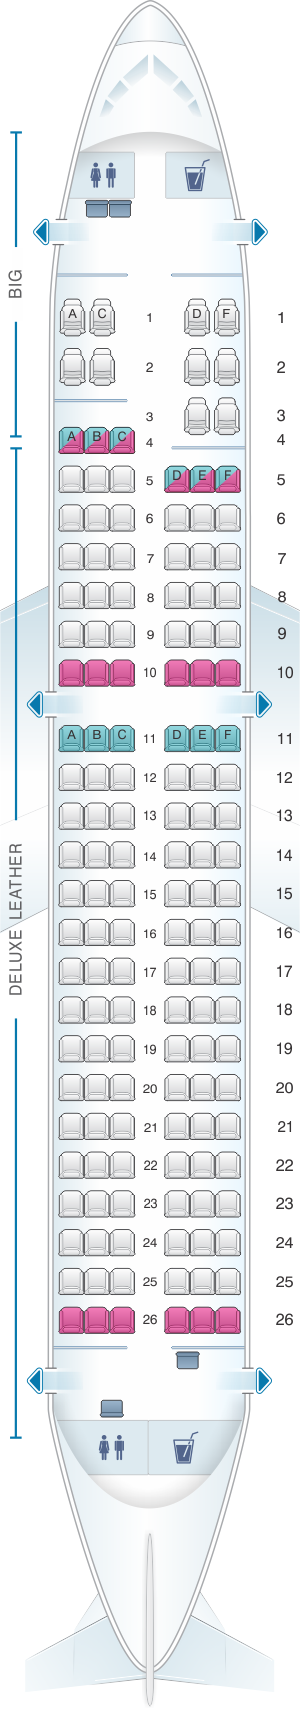 Spirit Airlines Airplane Seating Chart Seat Map Spirit Airlines Airbus A319 | Seatmaestro